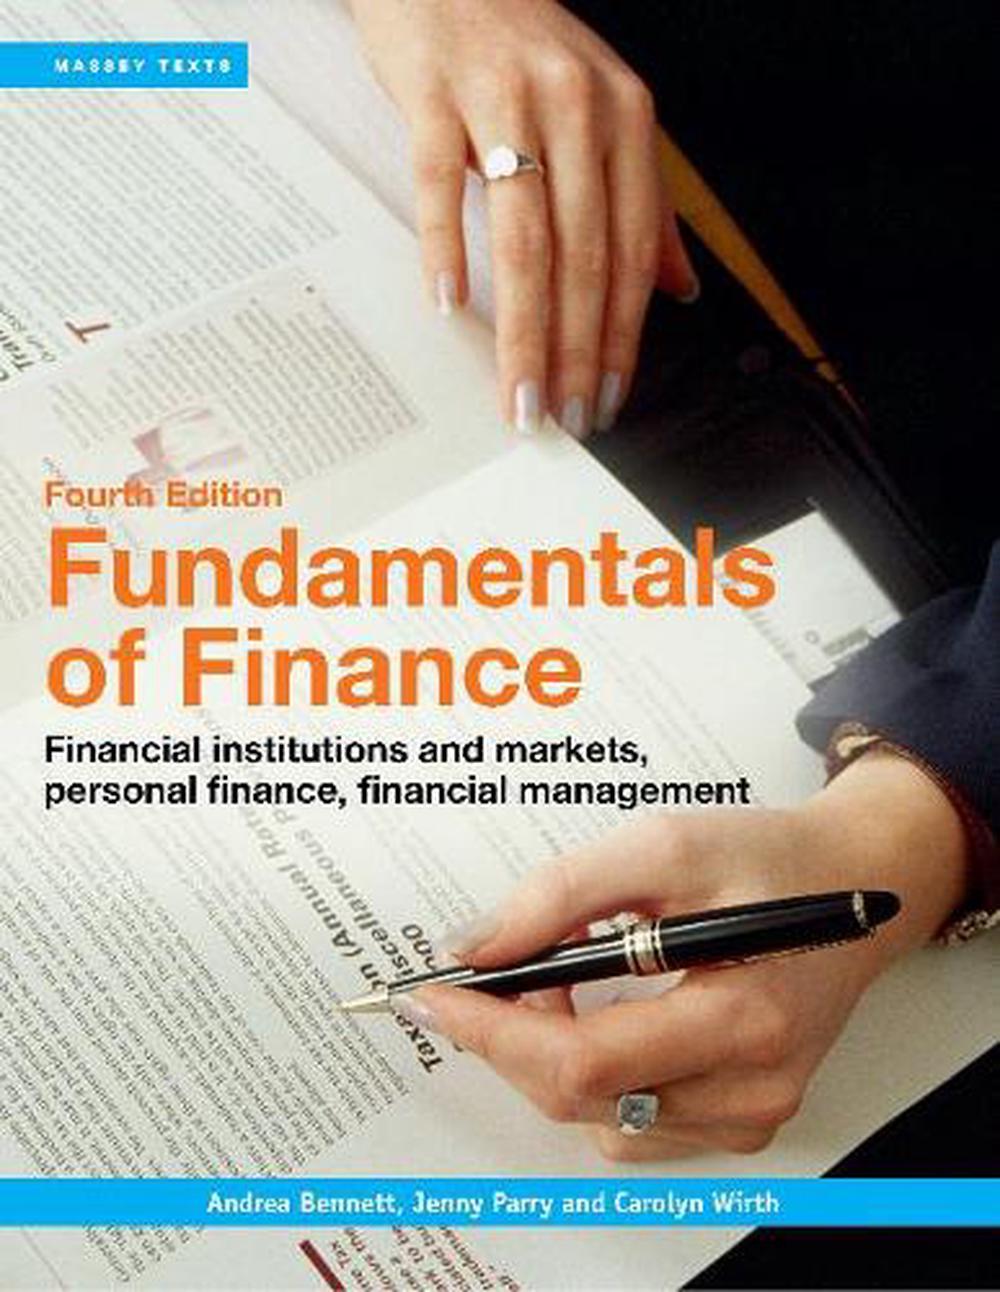 the finance book review